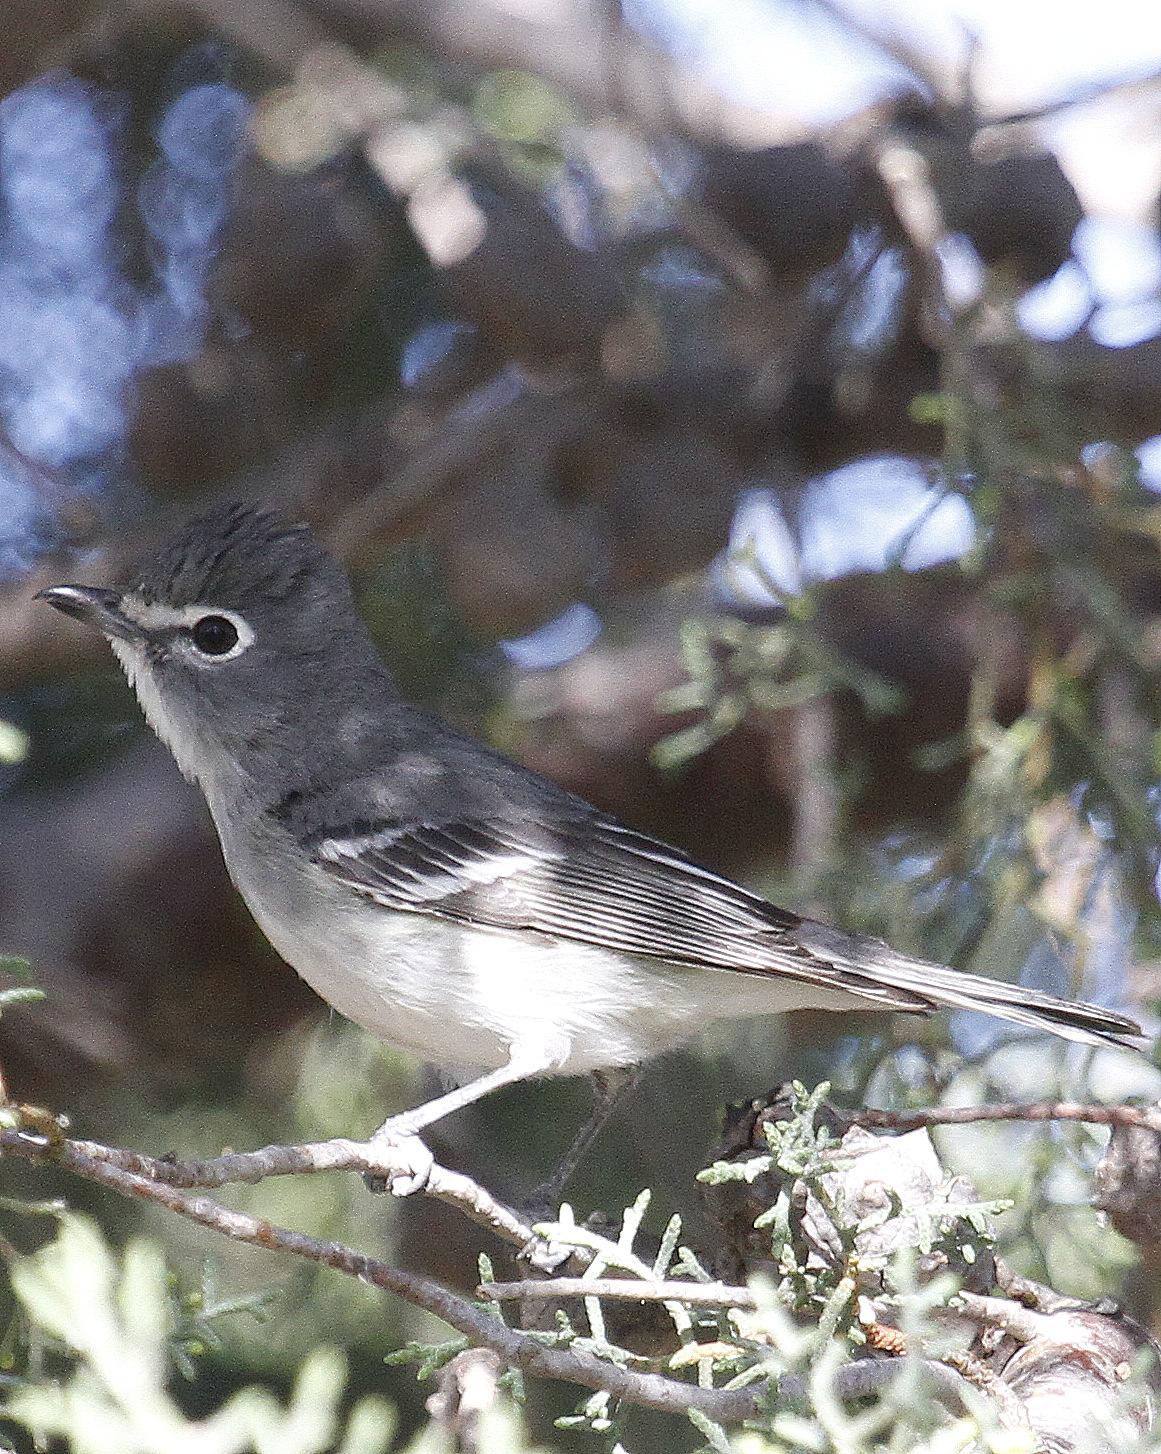 Plumbeous Vireo Photo by Isaac Sanchez